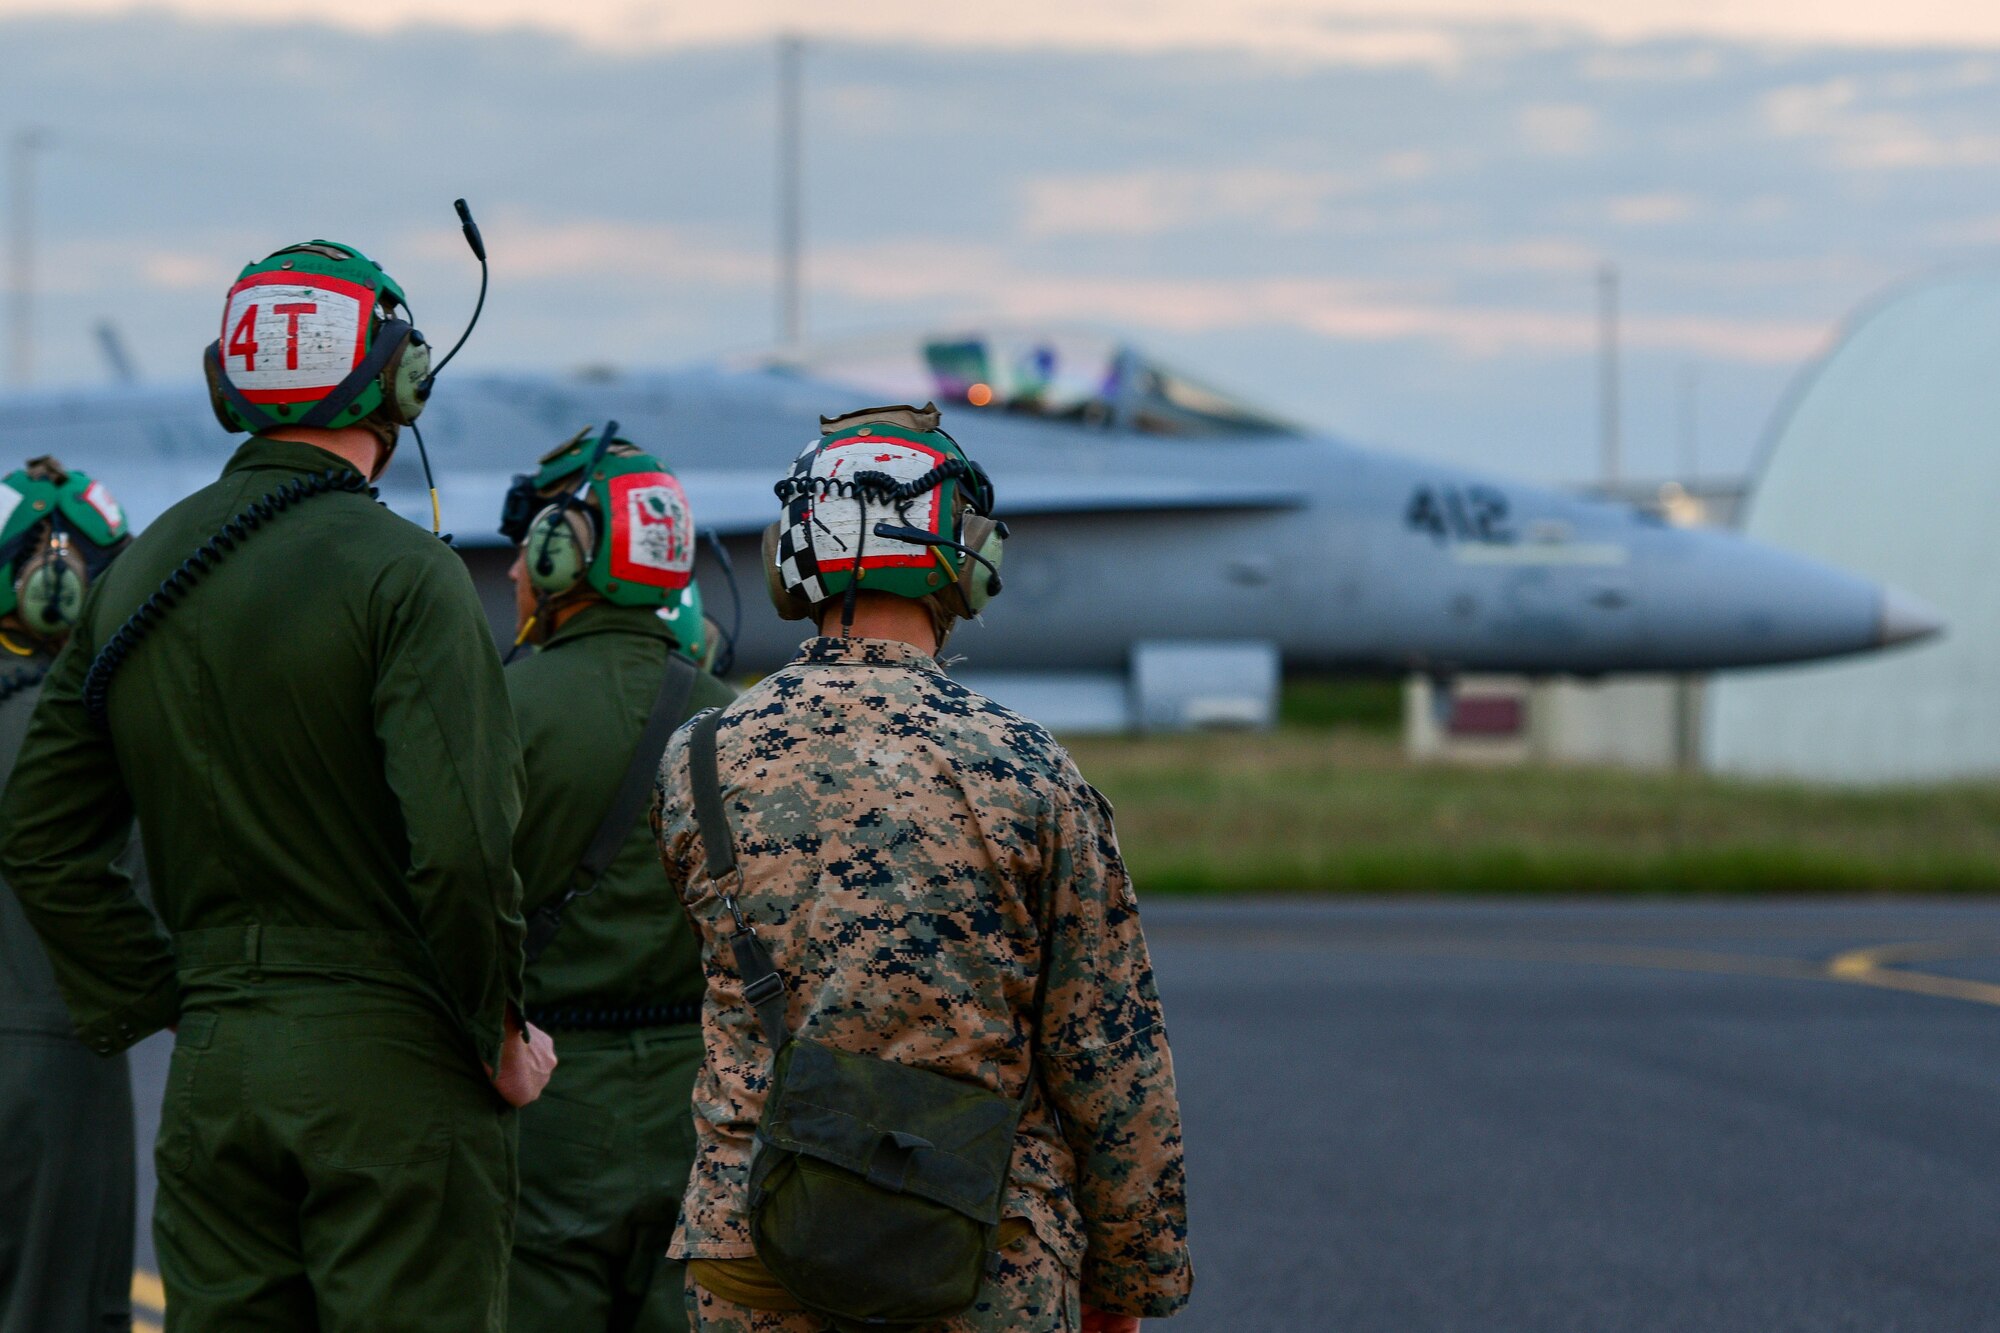 U.S. Marines watch as an F/A-18 Hornet assigned to the Marine Fighter Attack Squadron 323 based out of Marine Corps Air Station Miramar, California, taxis for takeoff at Aviano Air Base, Italy, Sept. 20, 2022. More than 200 U.S. Marines were deployed to Aviano AB for approximately two months to integrate and train with the 510th Fighter Squadron as part of a dynamic force employment. (U.S. Air Force photo by Senior Airman Brooke Moeder)